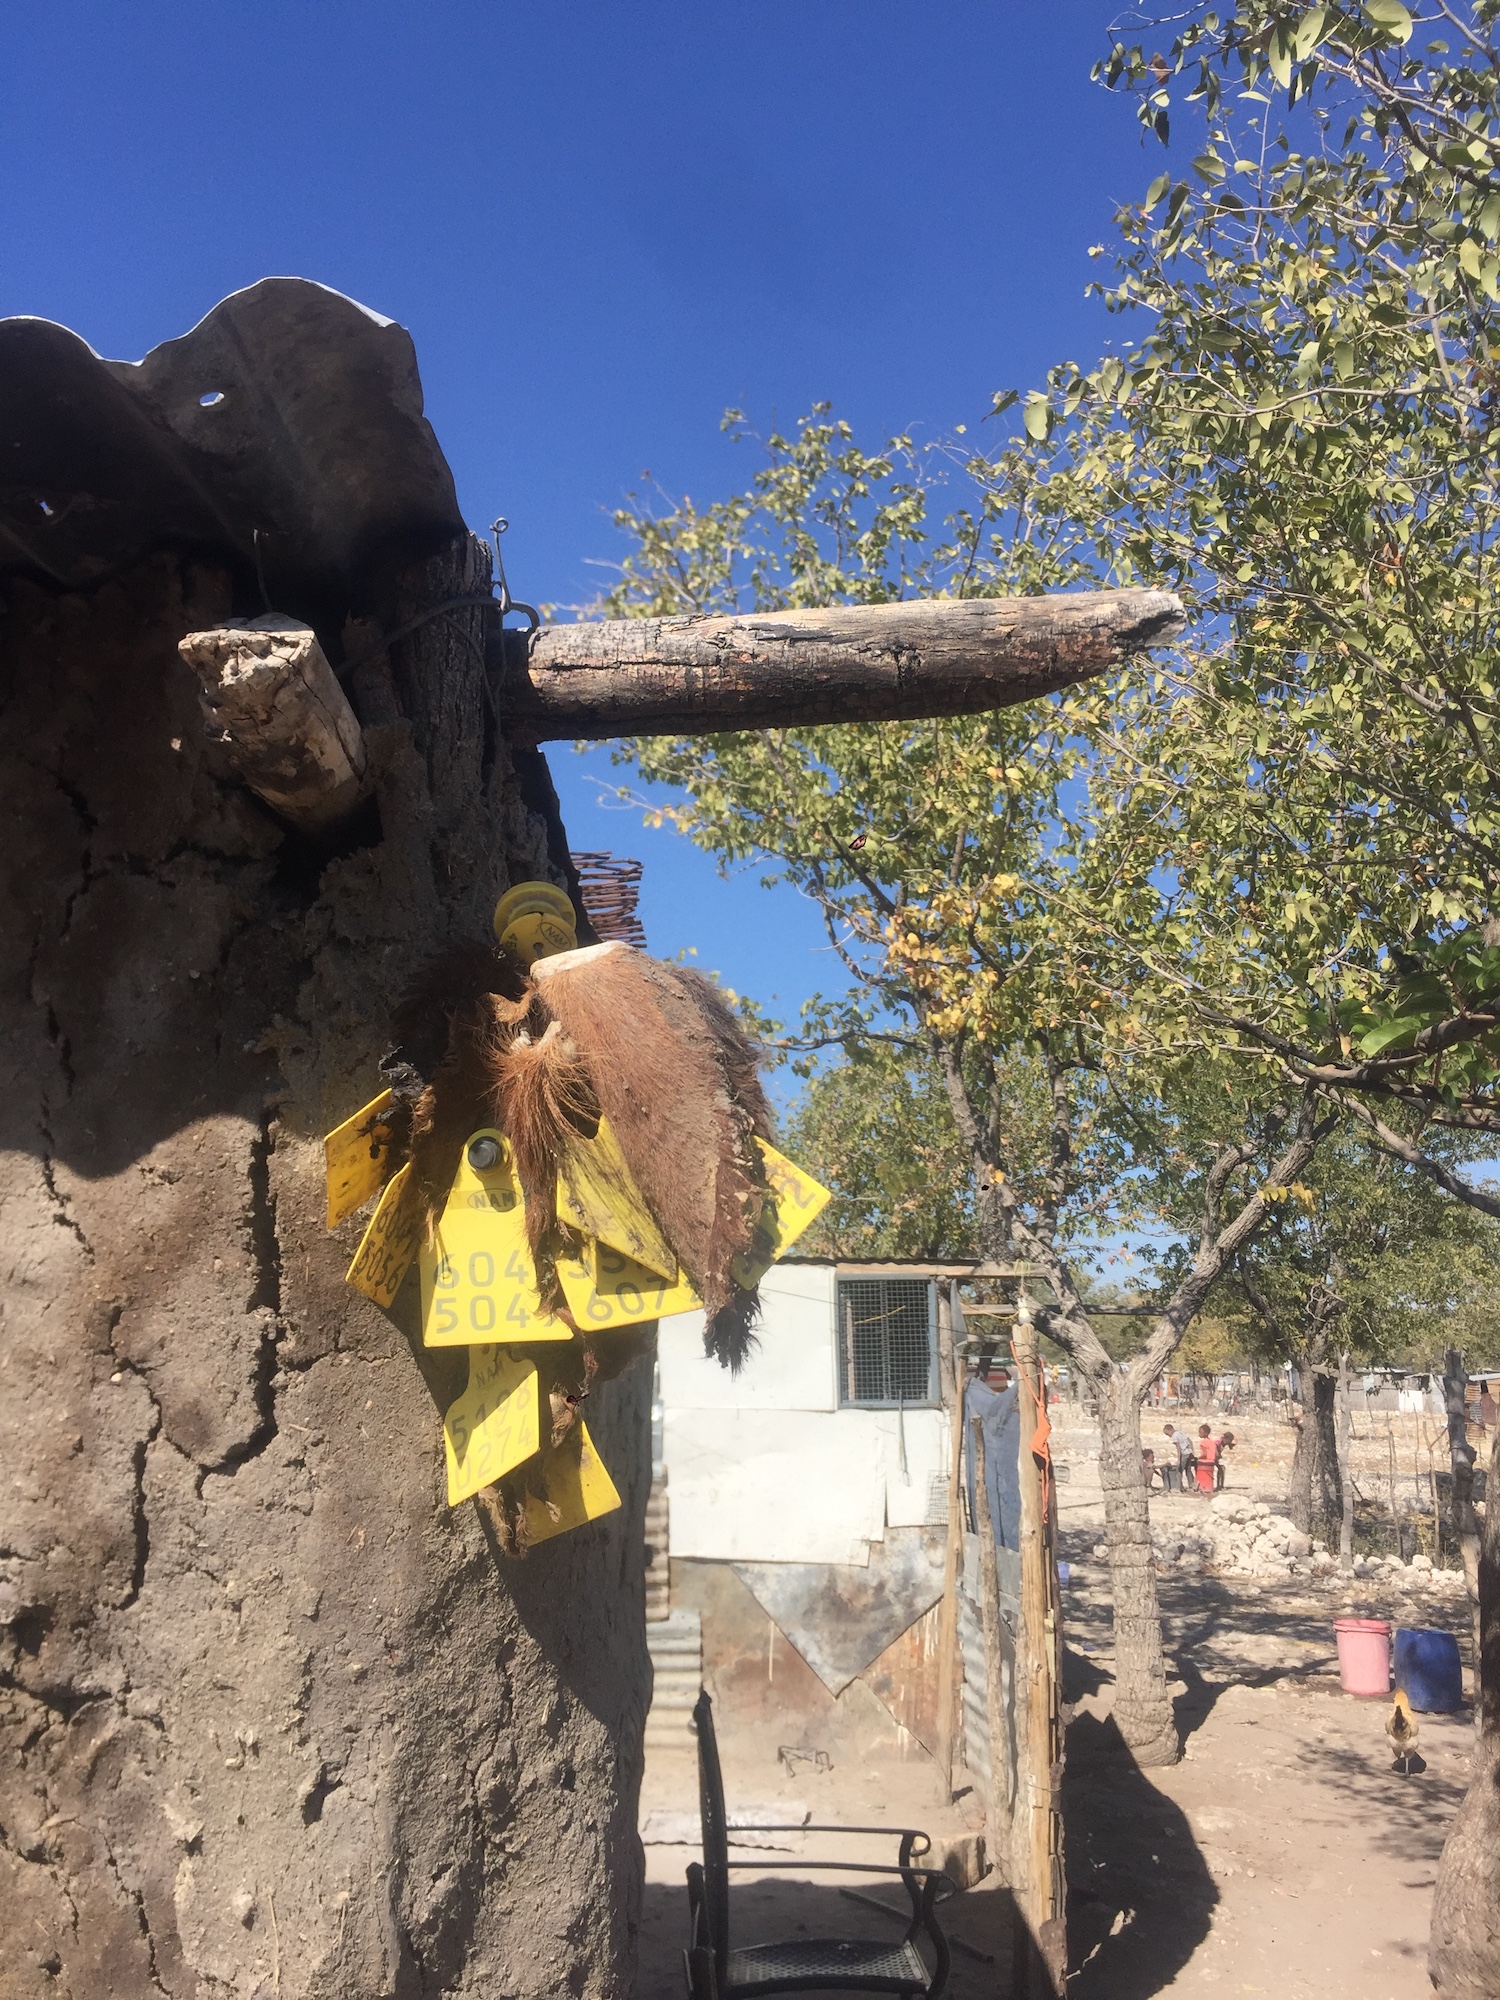 Bright yellow plastic tags still attached to cattle ears are hung from the side of a mud-walled building.